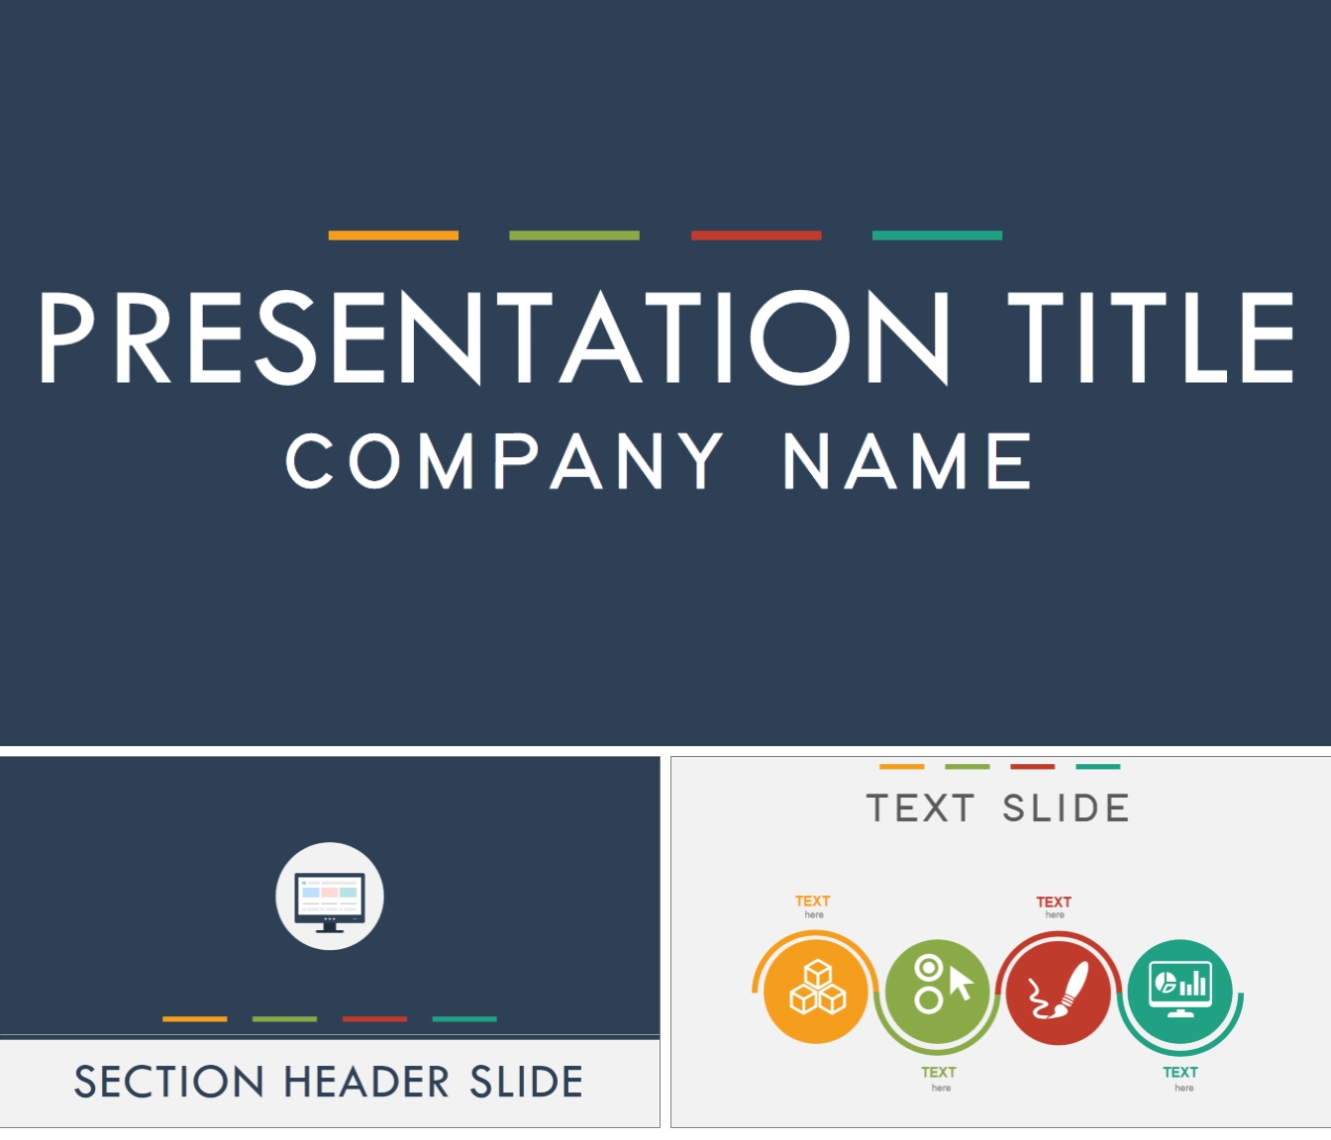 7 Amazing Powerpoint Template Designs For Your Company Or Personal Use Intended For How To Design A Powerpoint Template